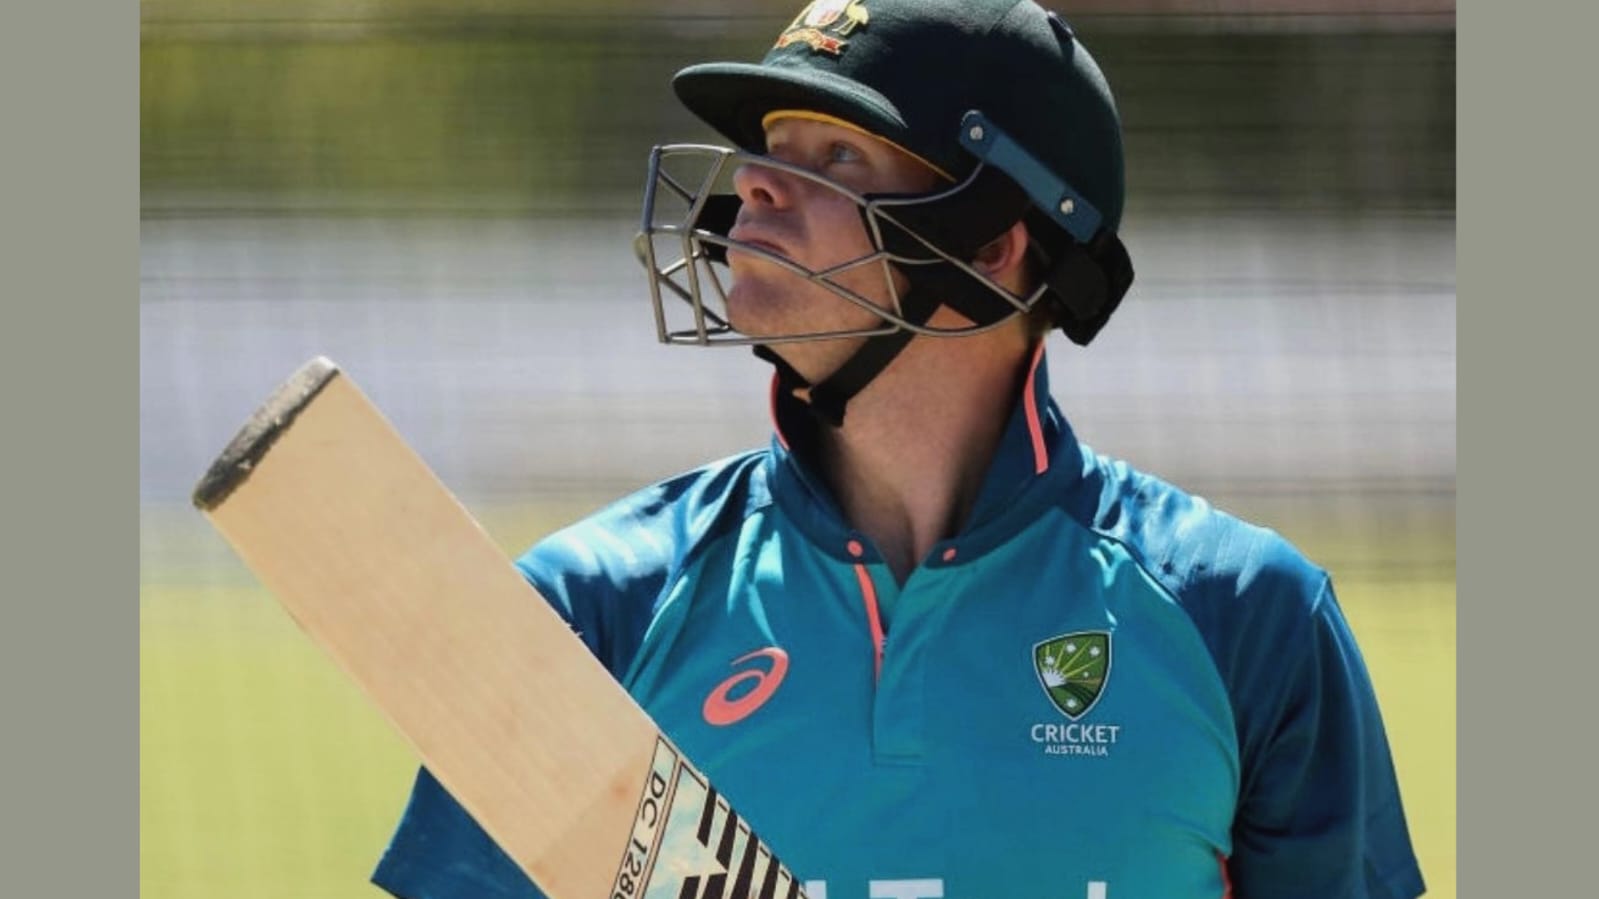 “Don’t really like waiting to bat”: Steve Smith on opening the batting